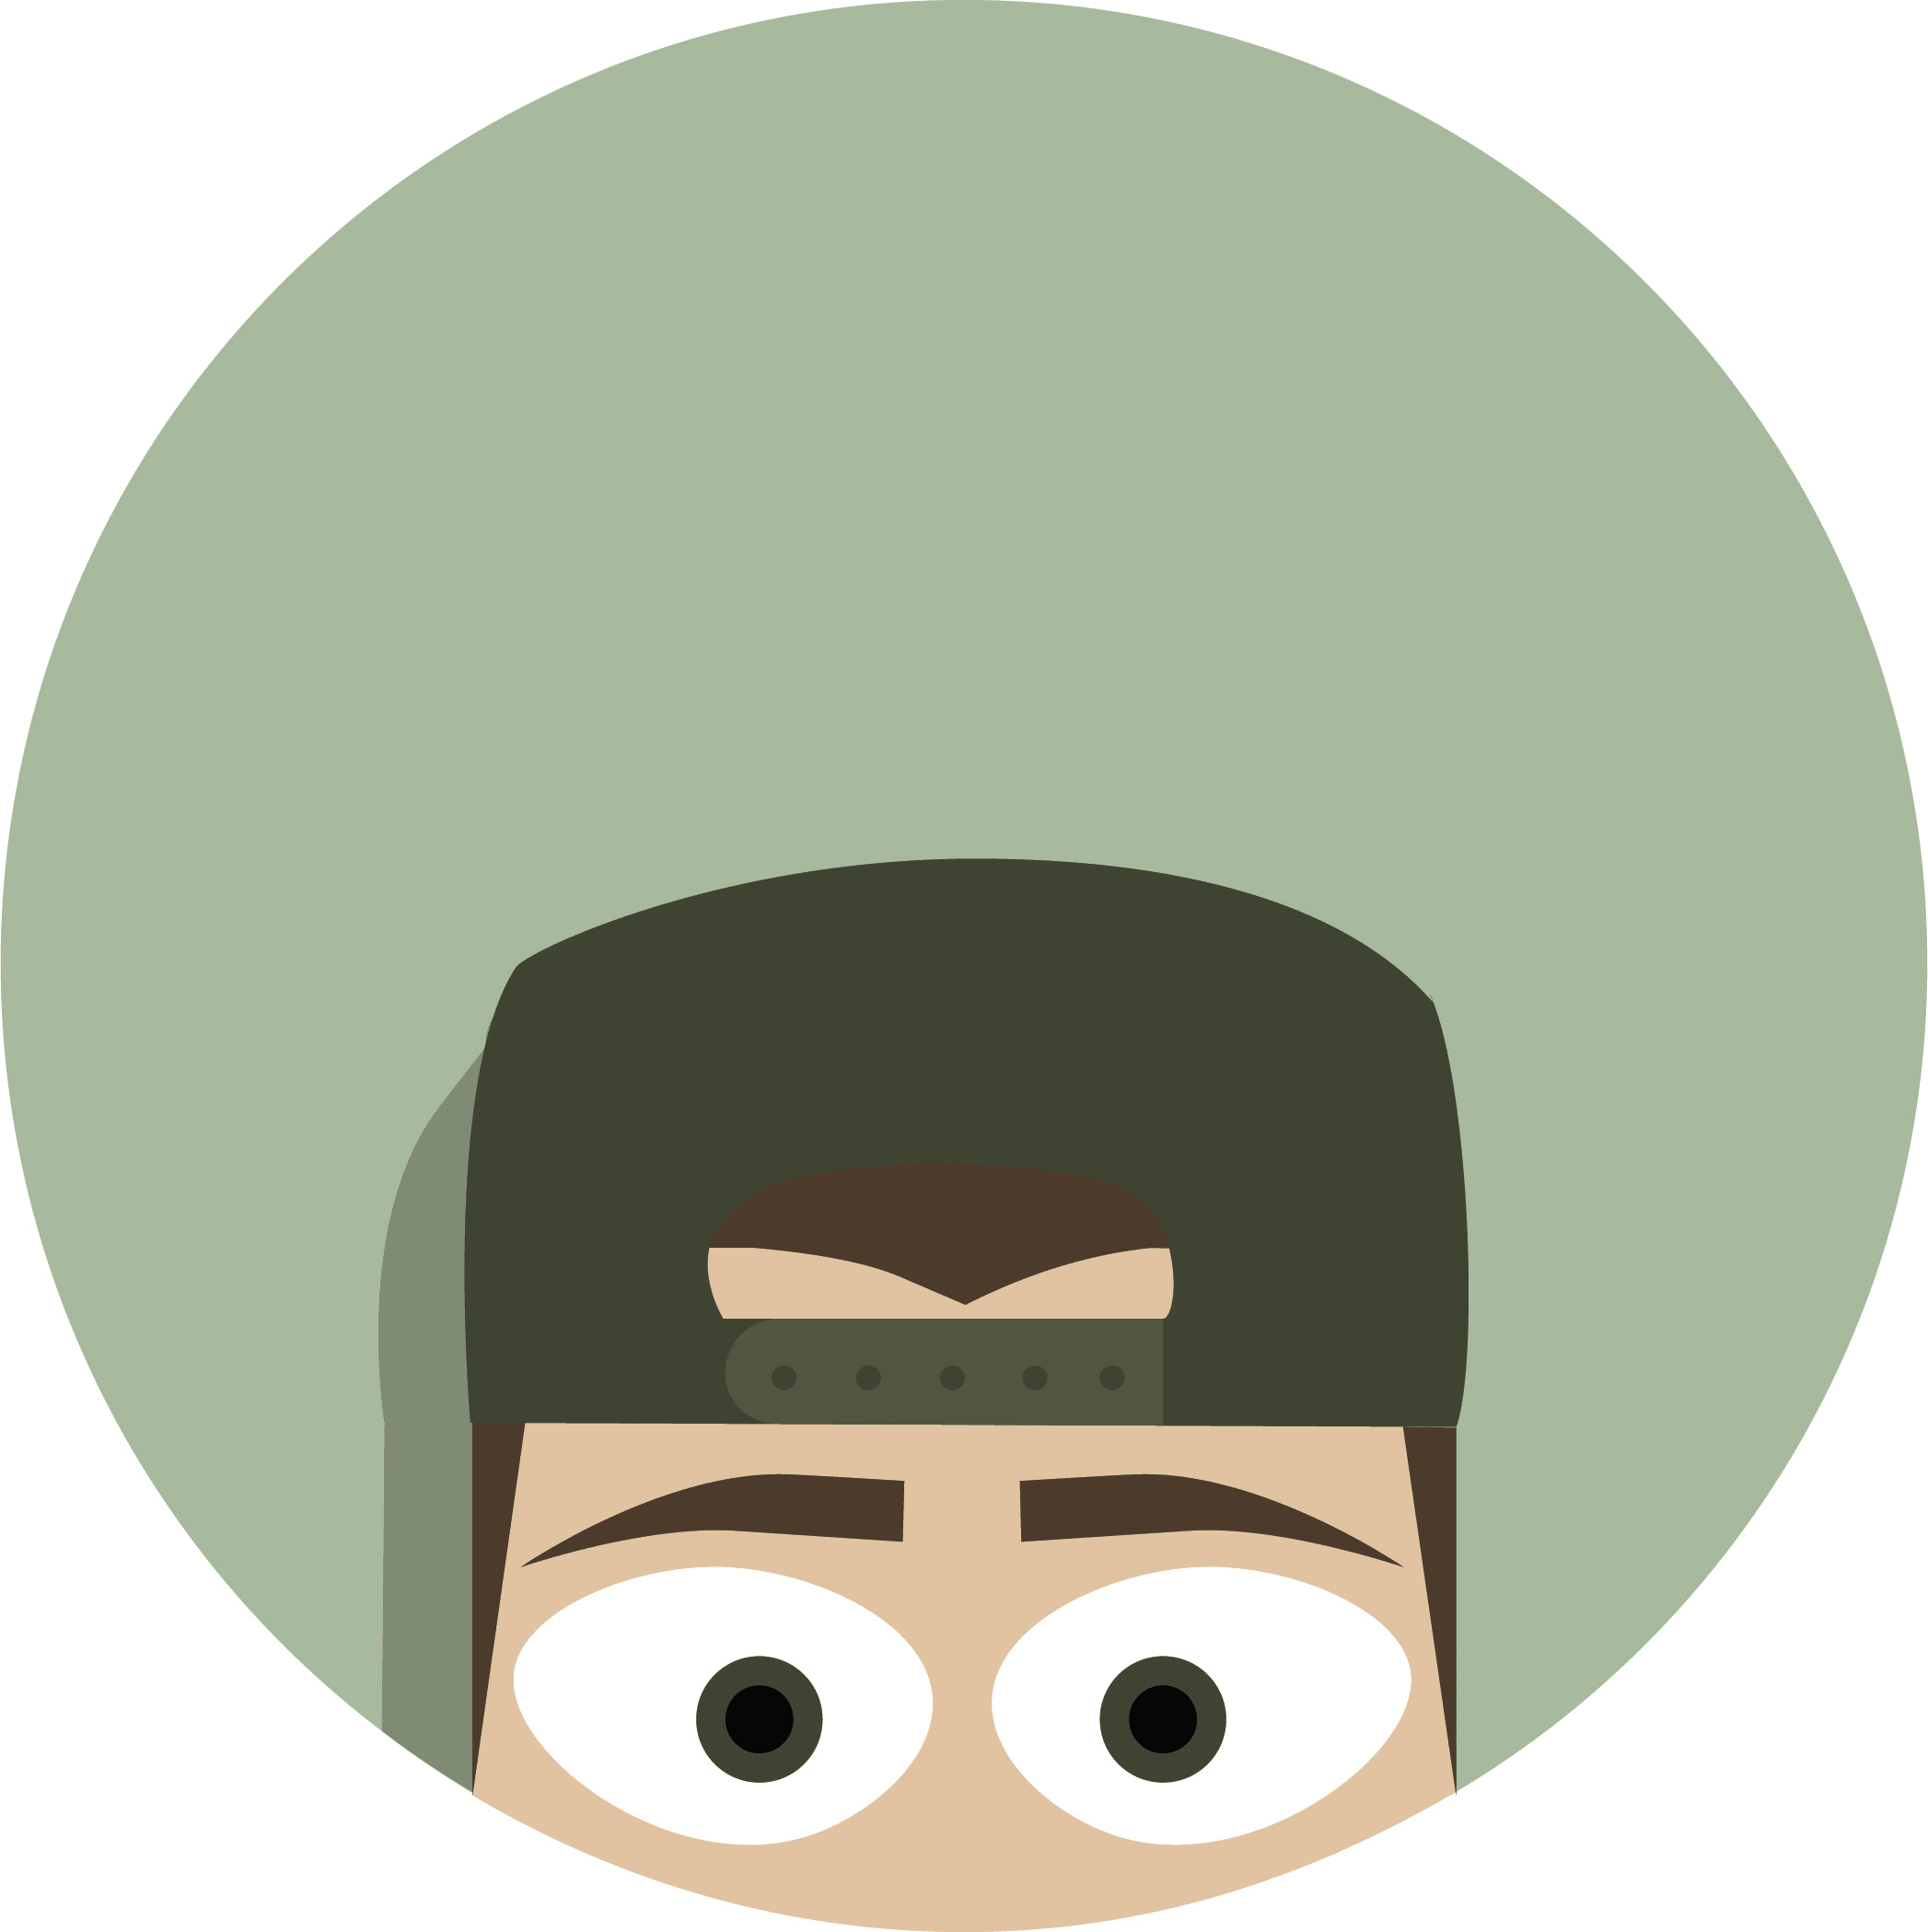 Create a cartoon icon of yourself by Taylordolniak | Fiverr